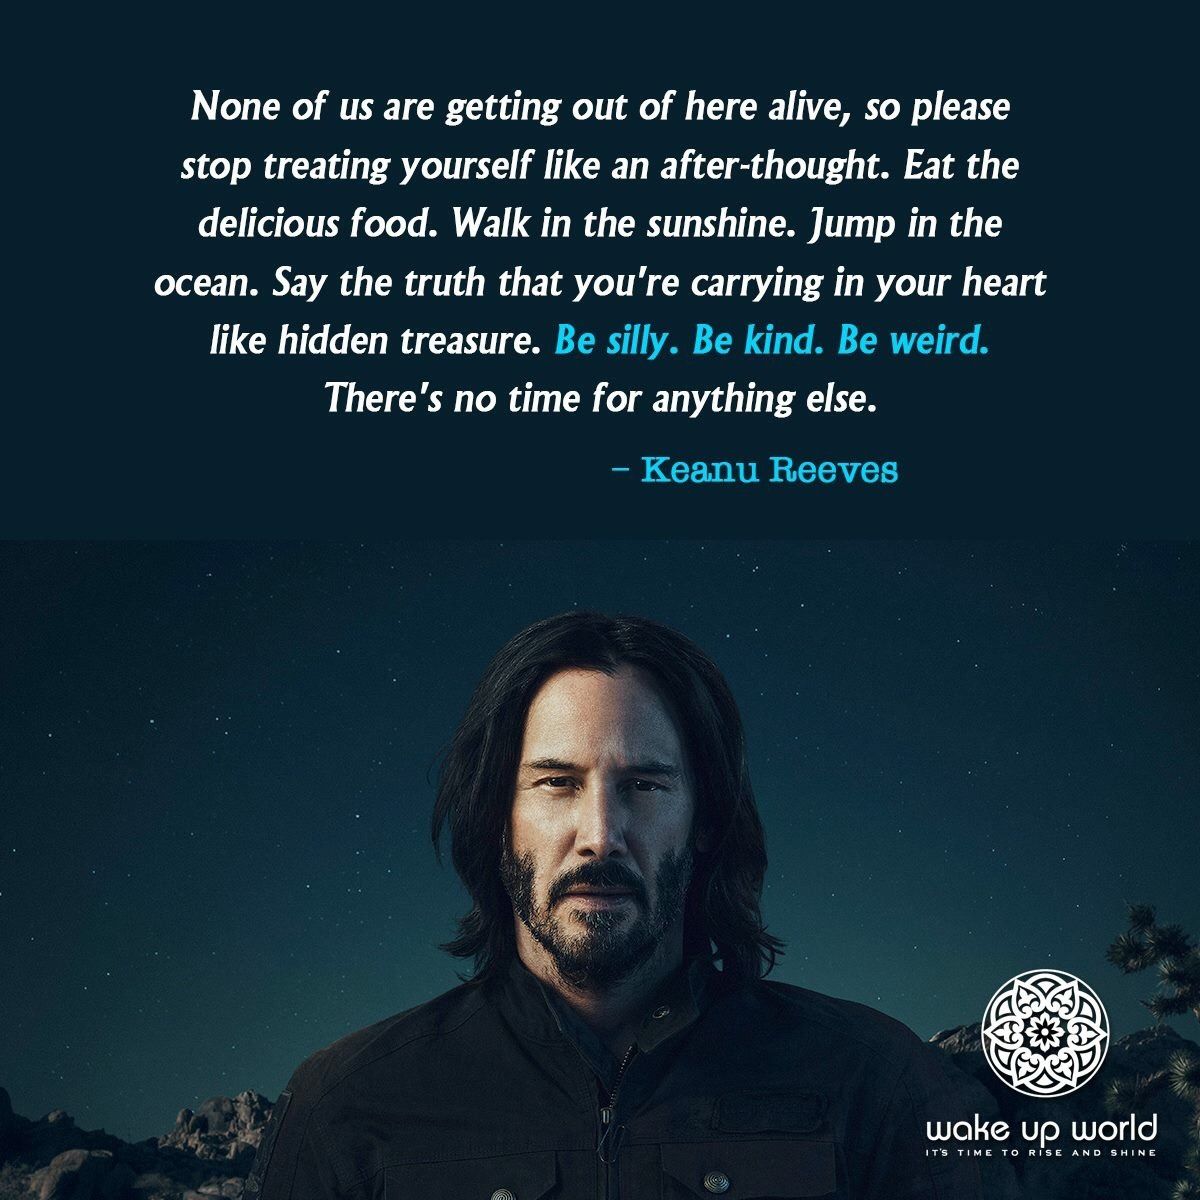 wholesome meme - keanu reeves quotes none of us are getting out of here alive - None of us are getting out of here alive, so please stop treating yourself an afterthought. Eat the delicious food. Walk in the sunshine. Jump in the ocean. Say the truth that